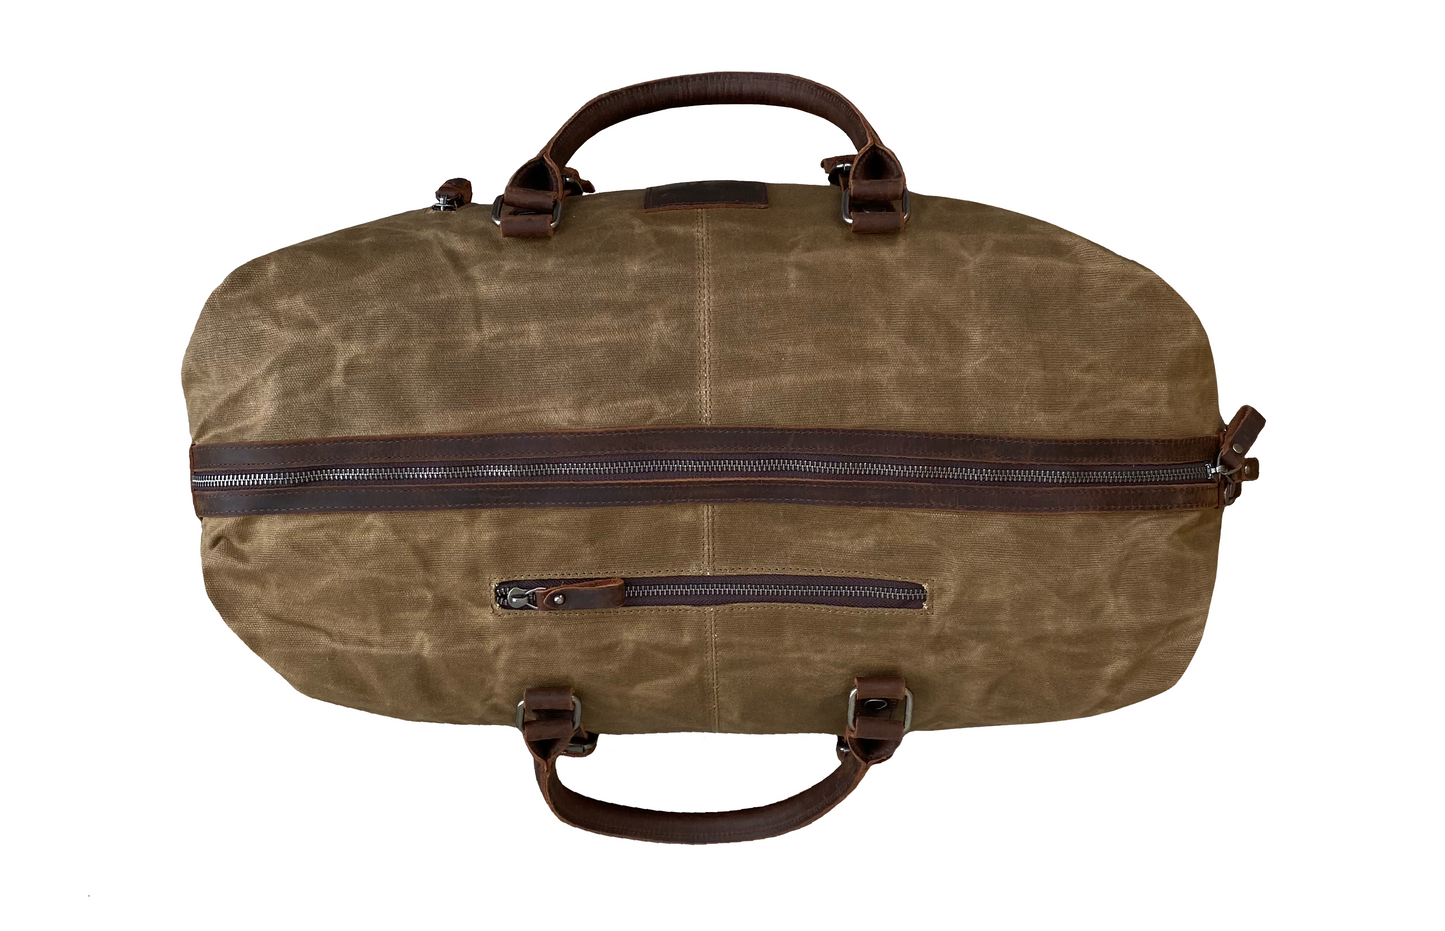 Leather and Wax Canvas Travel Duffle